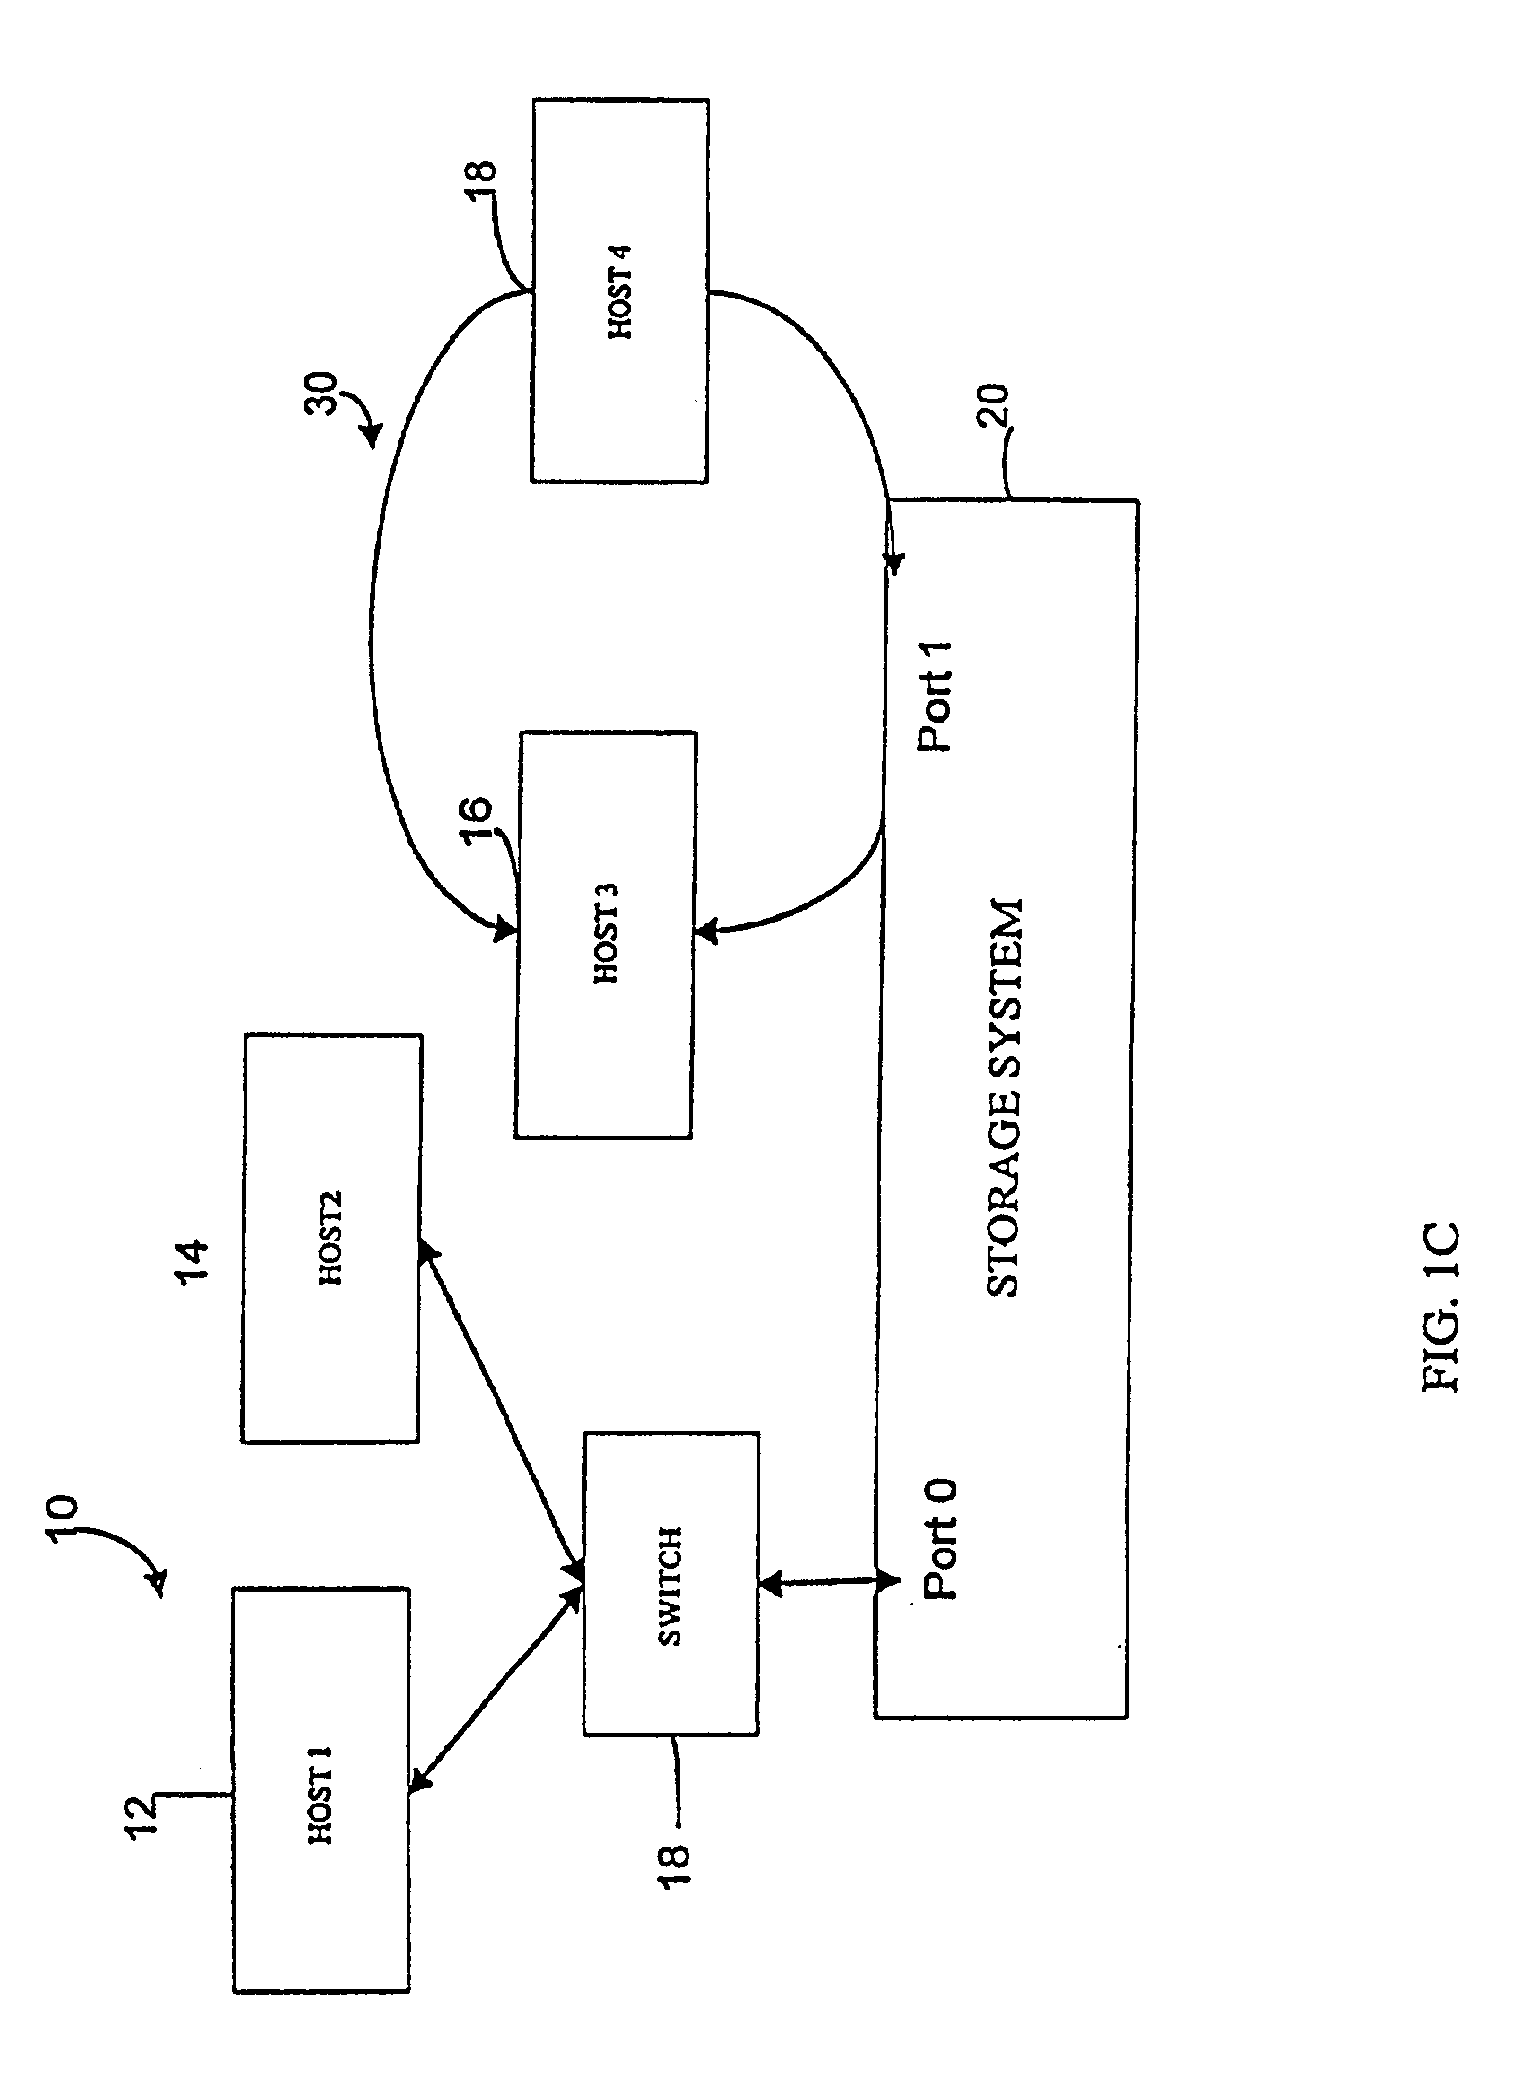 User interface for managing storage in a storage system coupled to a network